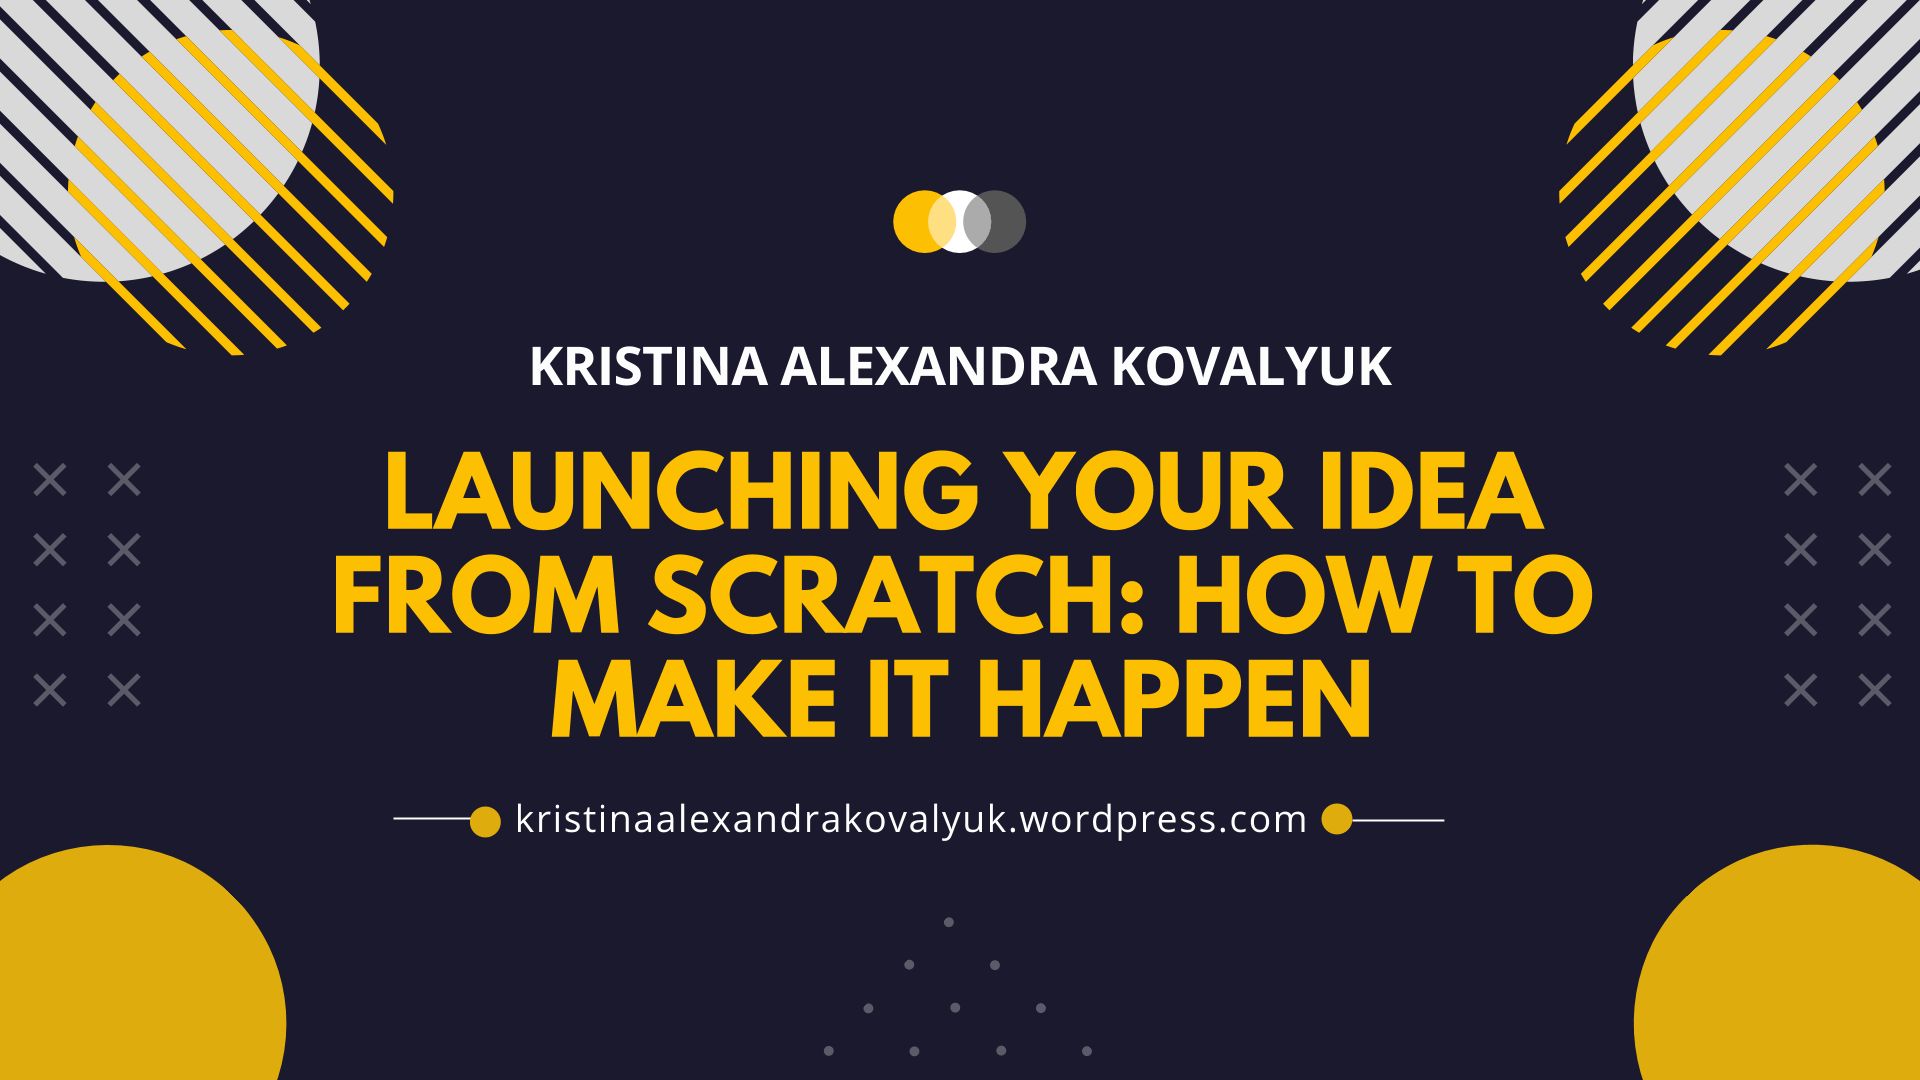 Making Your Idea Happen From Scratch: How To Get Started